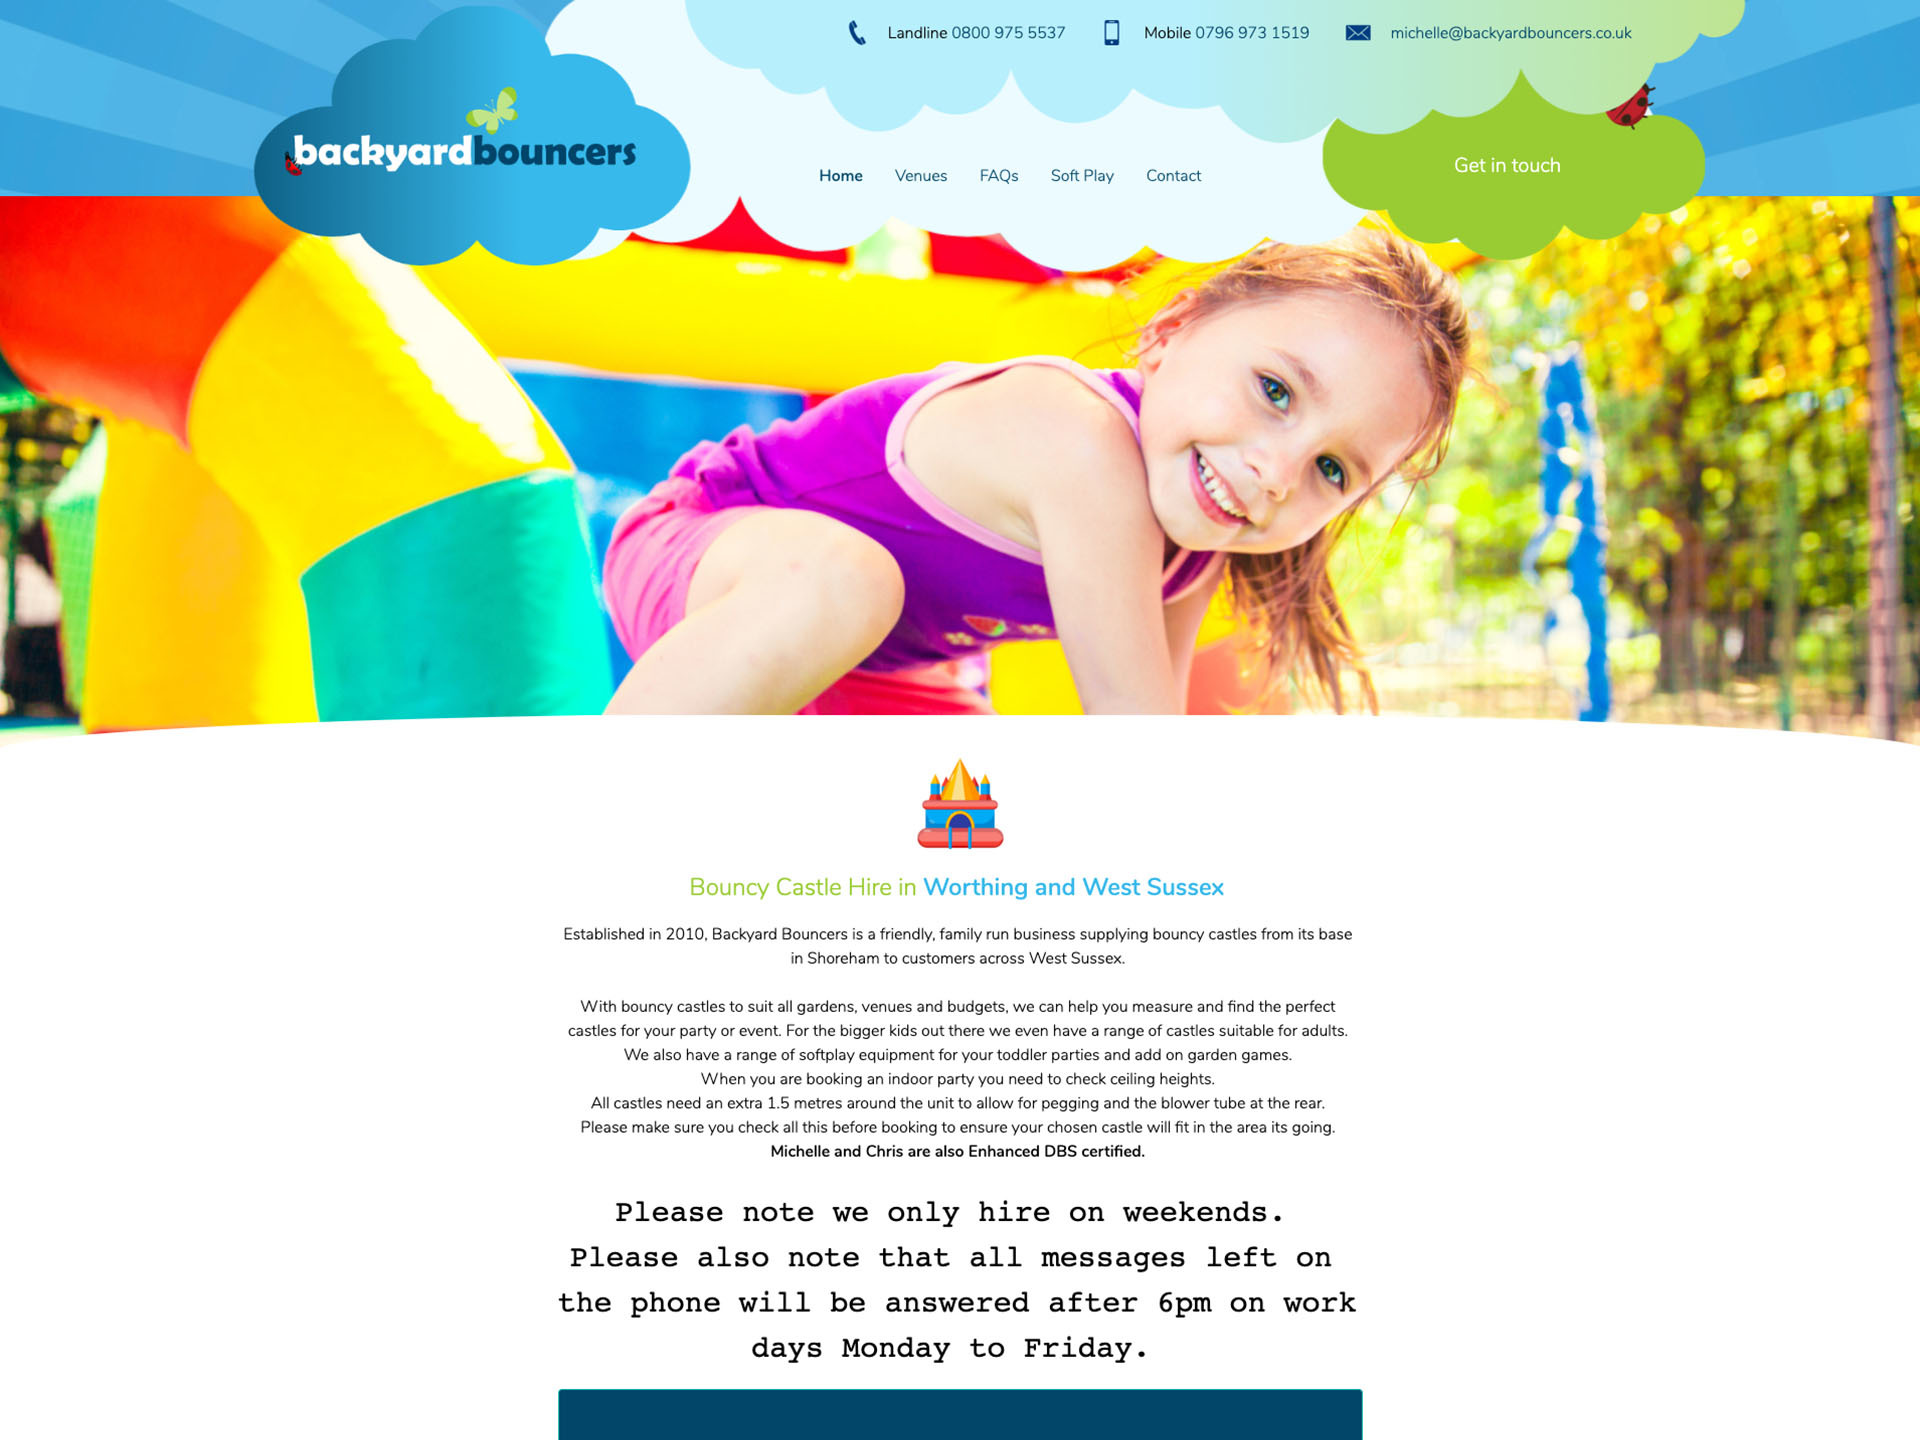 The Backyard Bouncers website created by it'seeze Horsham